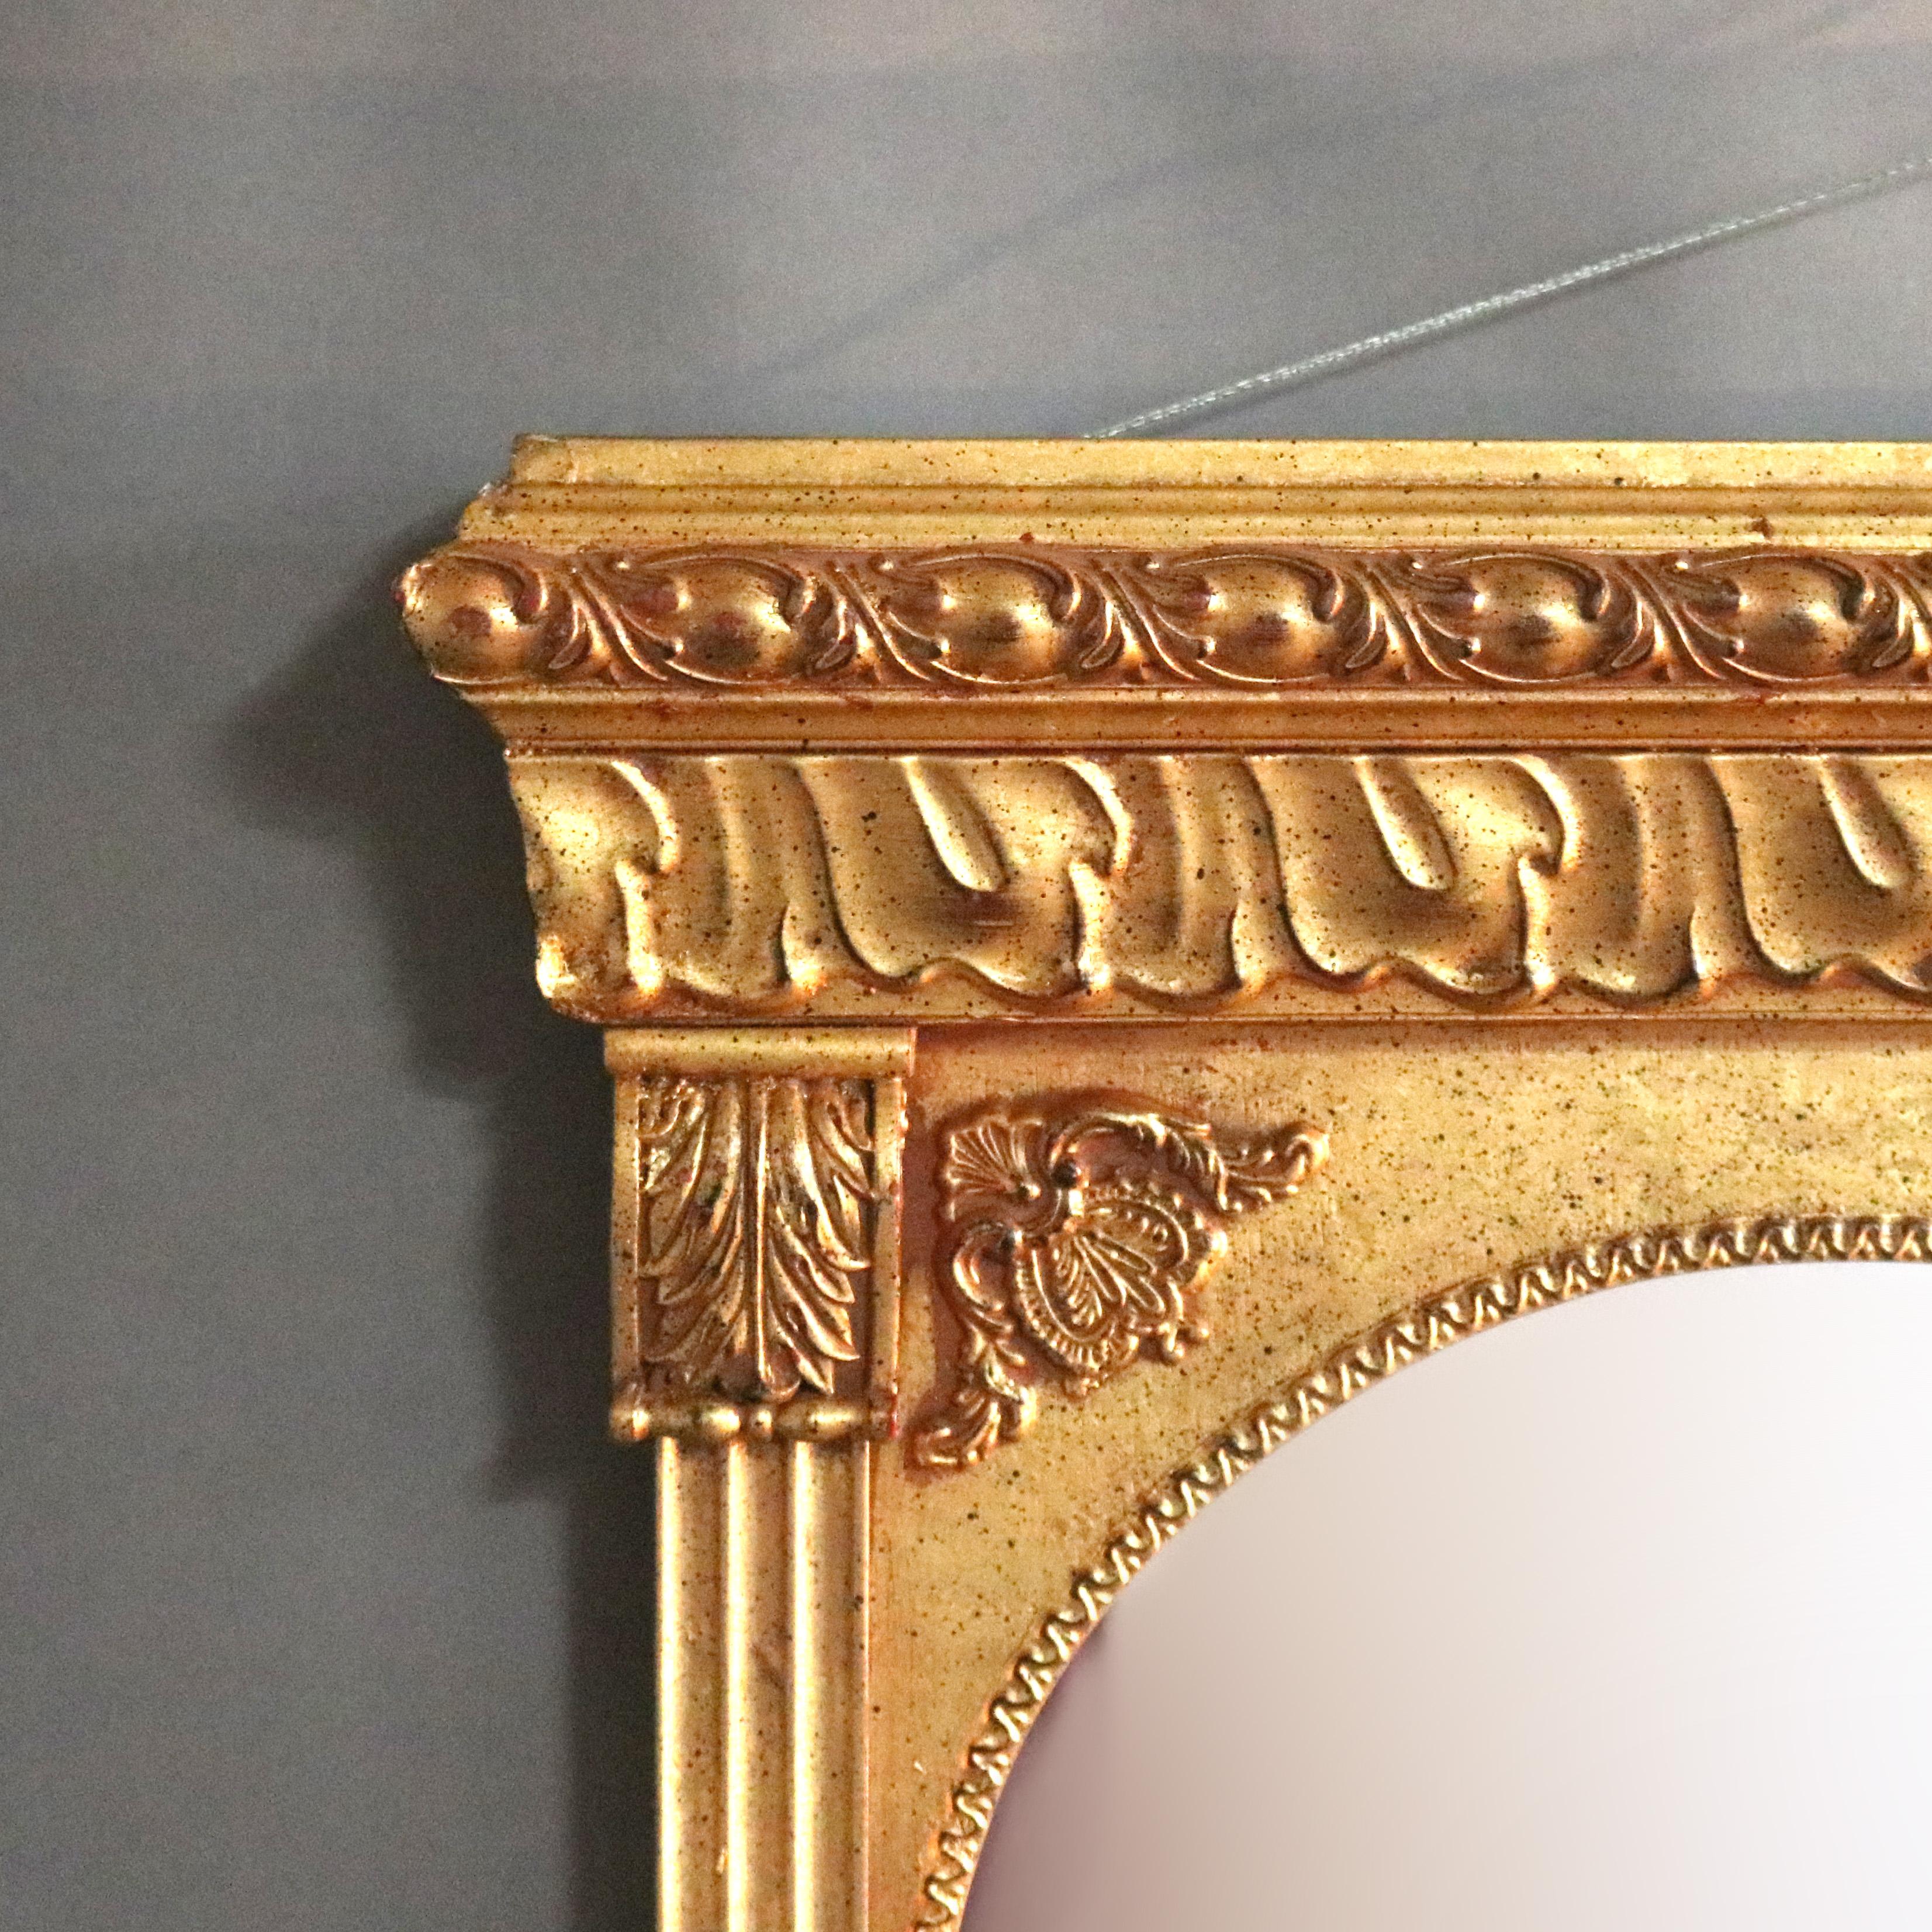 A vintage classical triptych over mantel mirror offers giltwood construction with three arched mirrors seated in reeded, foliate and acanthus decorated frame, 20th century

Measures: 36